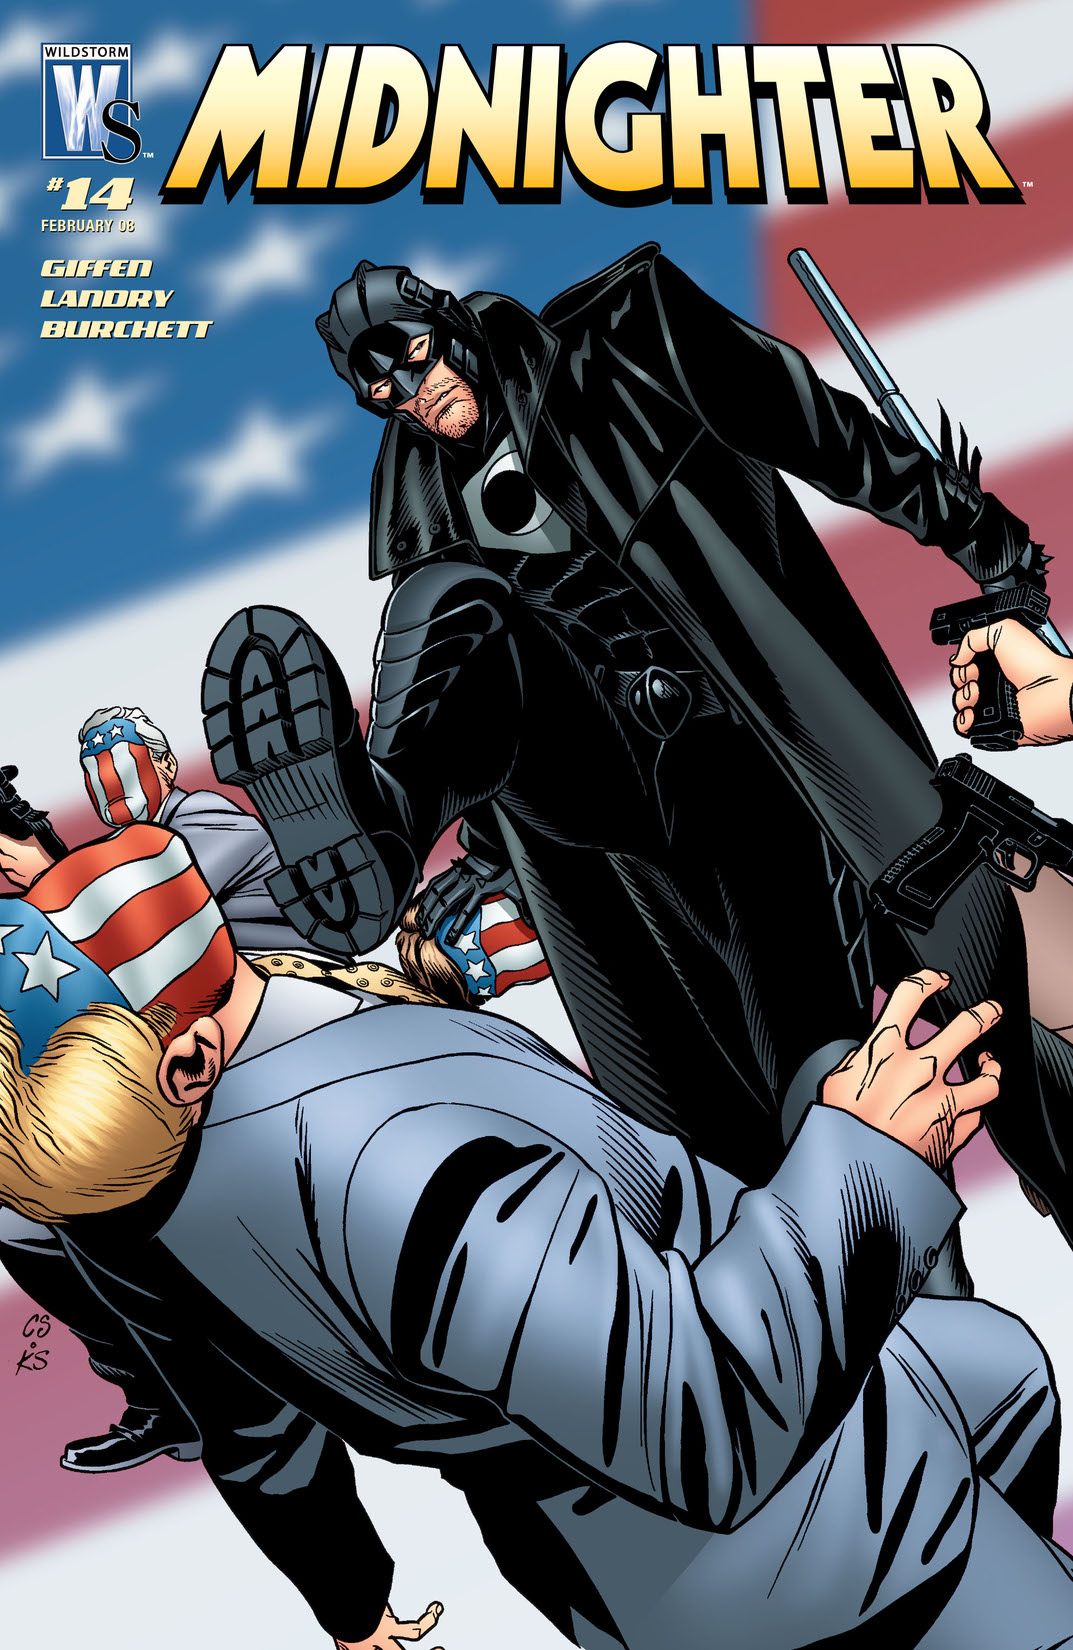 Midnighter (2006-) #14 preview images